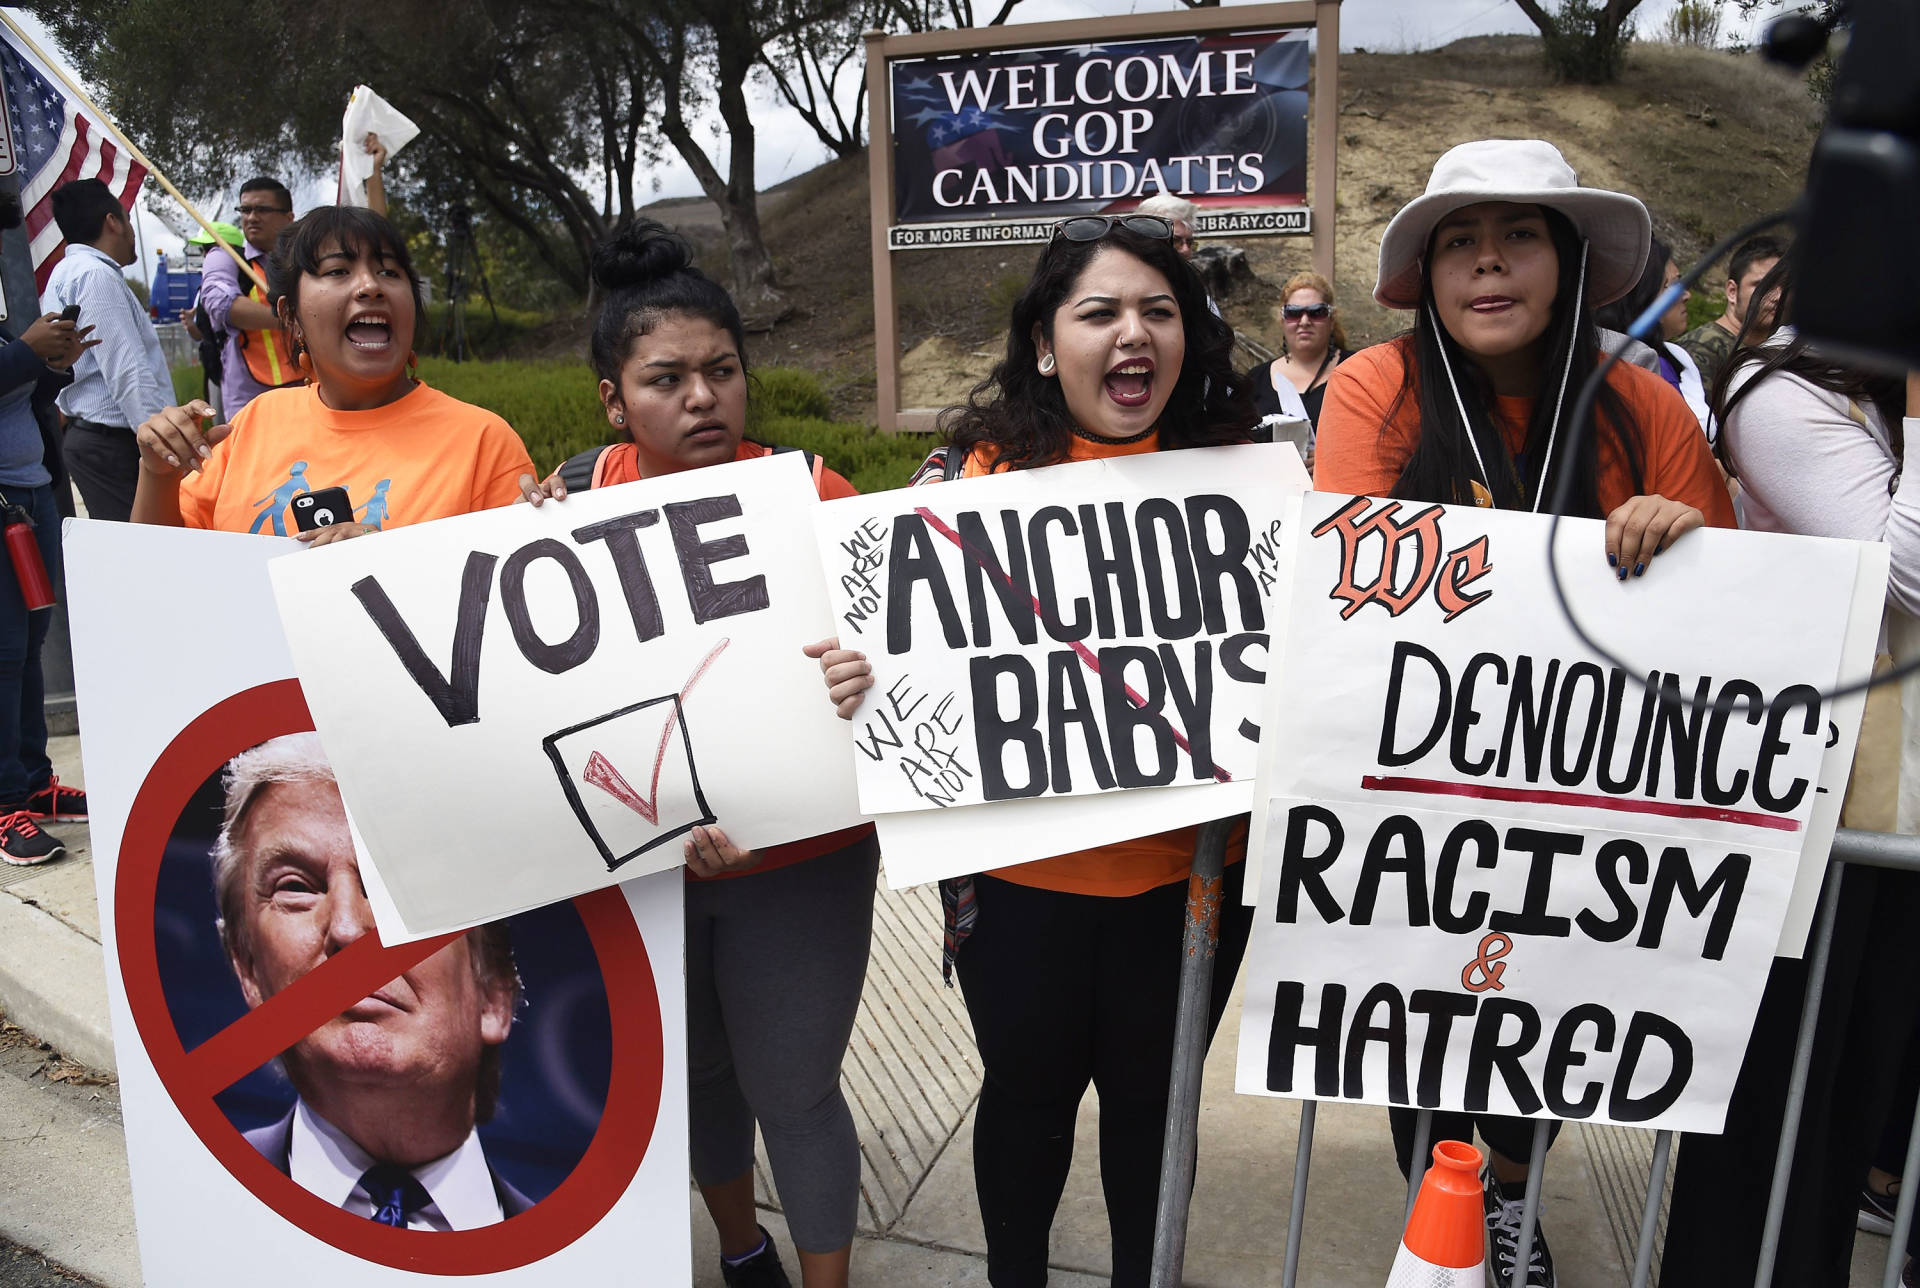 Latinos, immigration and workers' rights advocates and their supporters protest against Donald Trump and other Republican presidential hopefuls, outside a debate at the Ronald Reagan Presidential Library in Simi Valley on September 16, 2015. ROBYN BECK/AFP/Getty Images